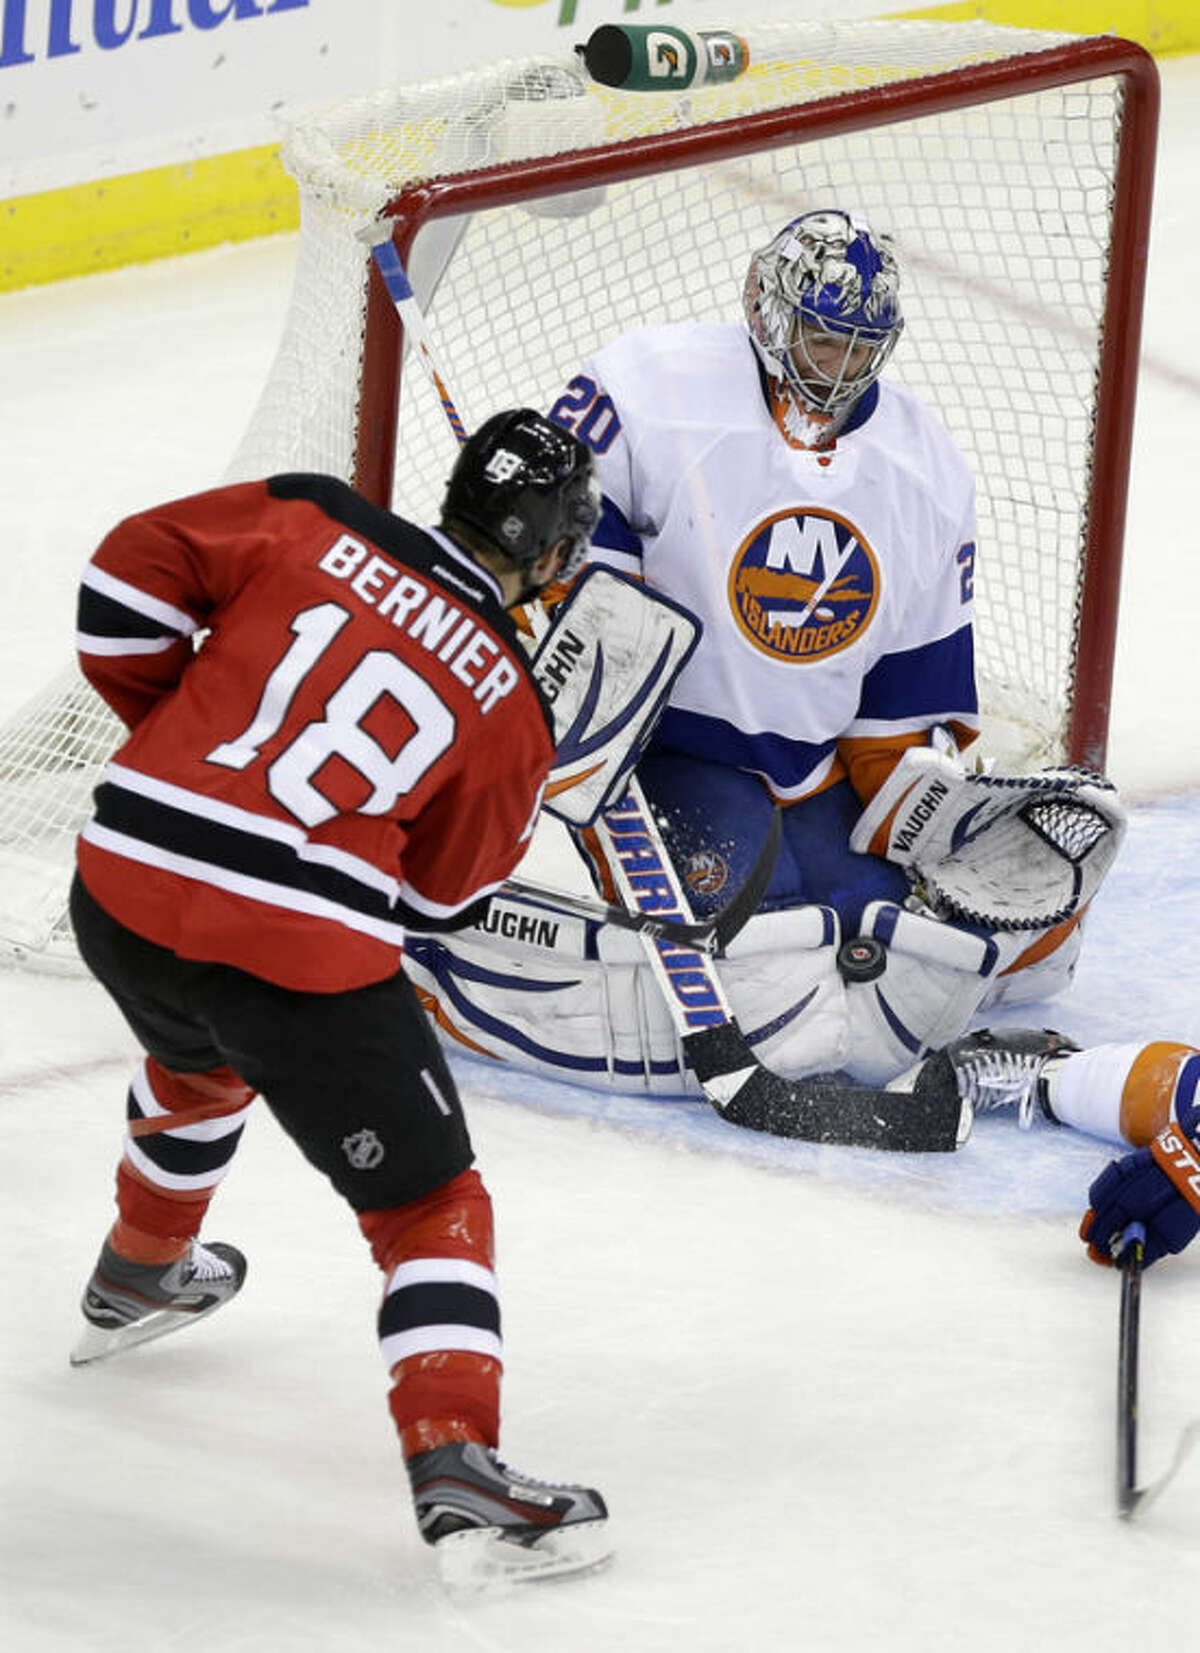 New York Islanders goalie Evgeni Nabokov (20) of Kazakhstan makes a save off his pads on a shot by New Jersey Devils' Steve Bernier (18) during the second period of an NHL hockey game Monday, April 1, 2013, in Newark, N.J. (AP Photo/Mel Evans)